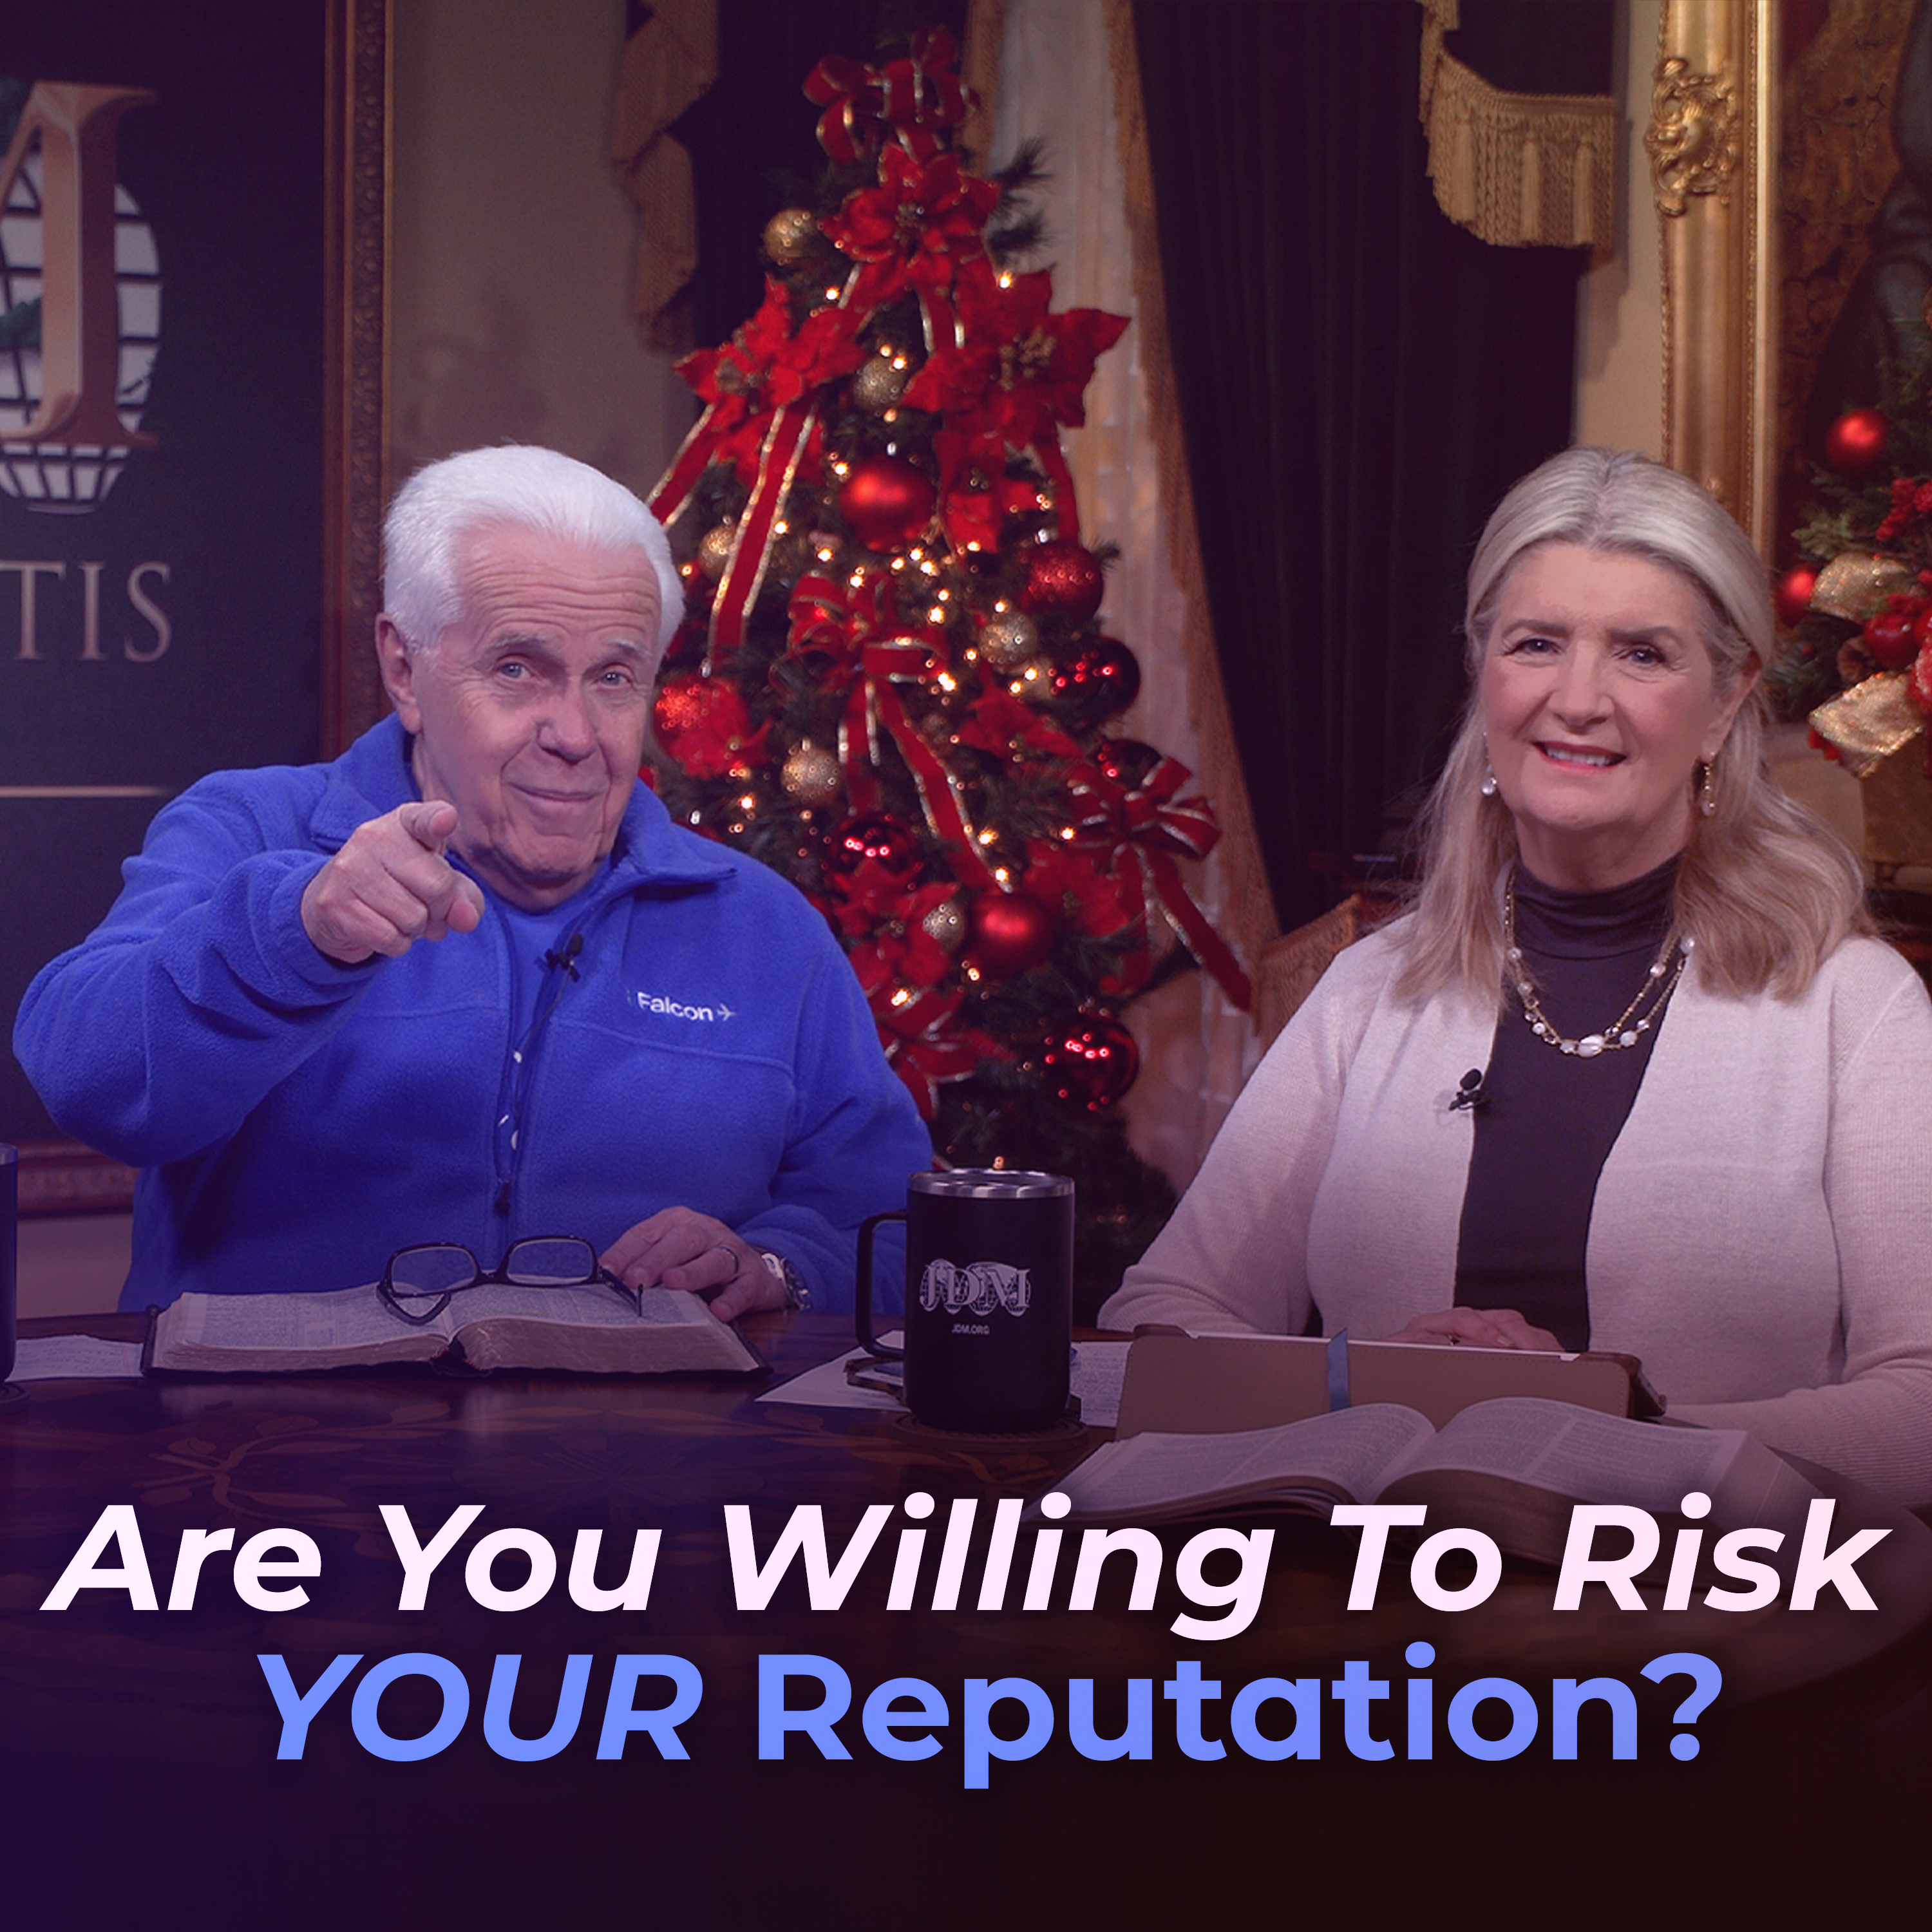 Are You Willing To Risk Your Reputation?